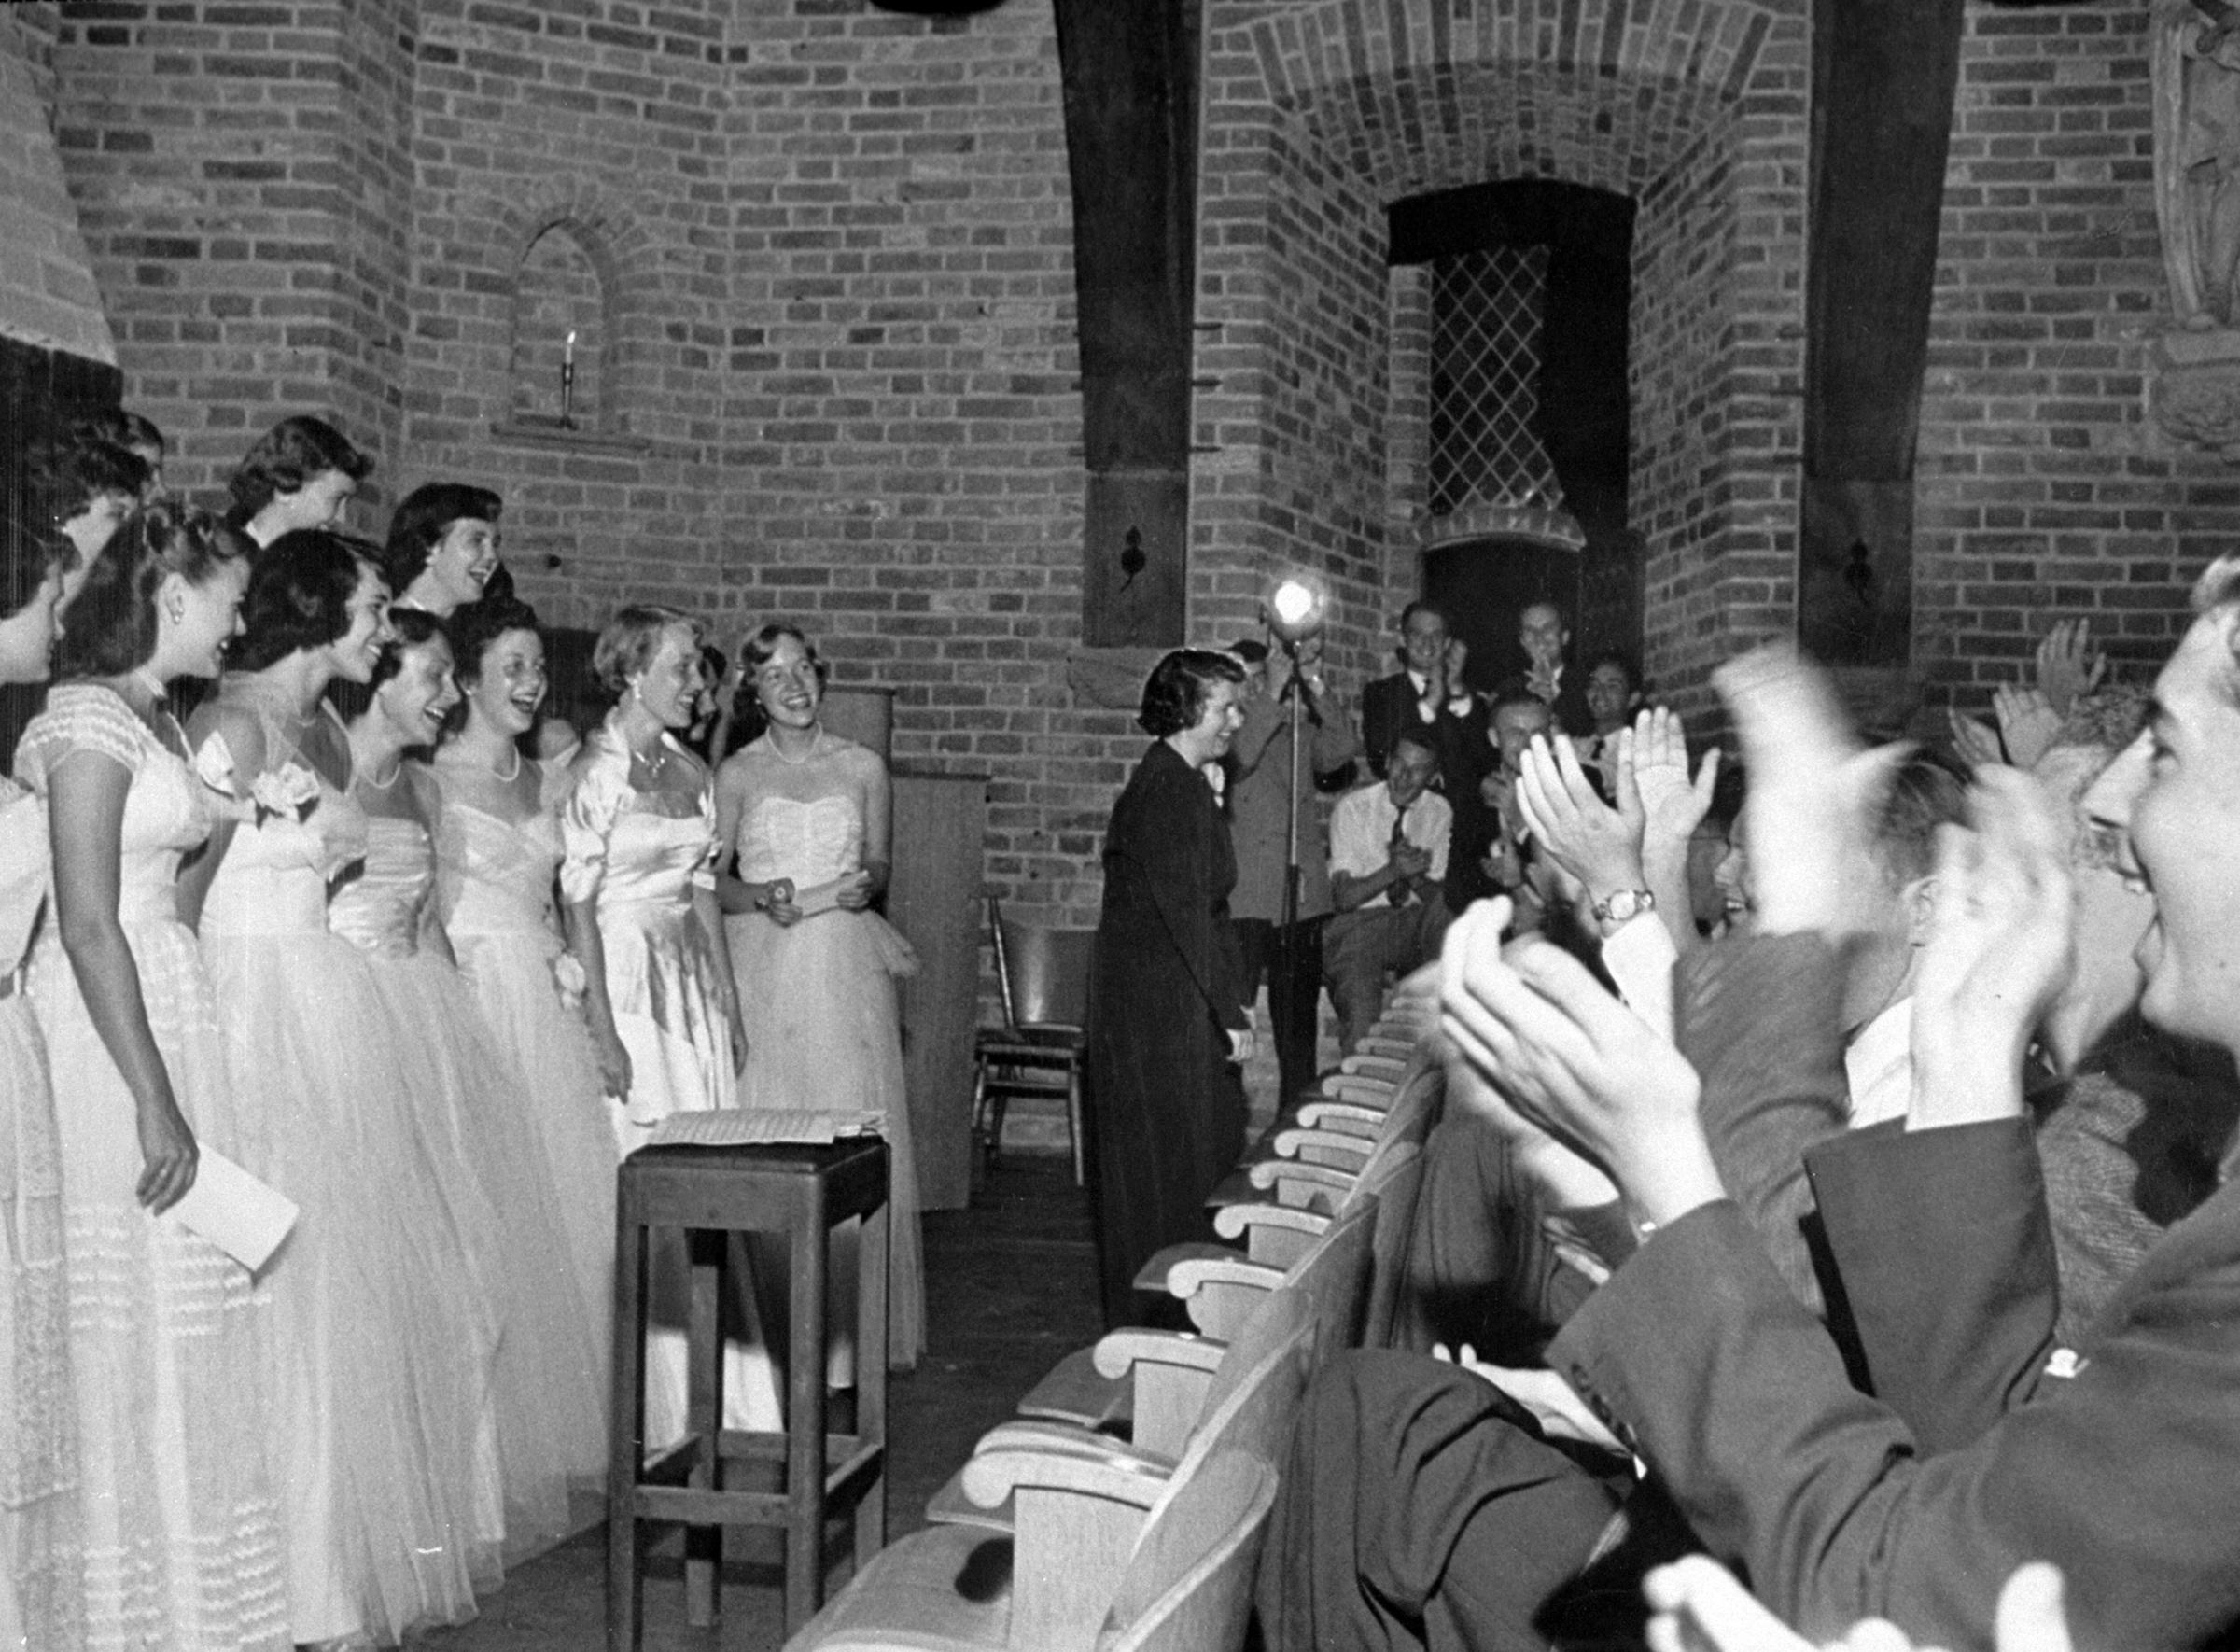 Dressed in white evening gowns, The Smith Singers get a tremendous ovation following a concert in weapons room of Dutch castle at Breukelen, namesake of New York's Brooklyn.